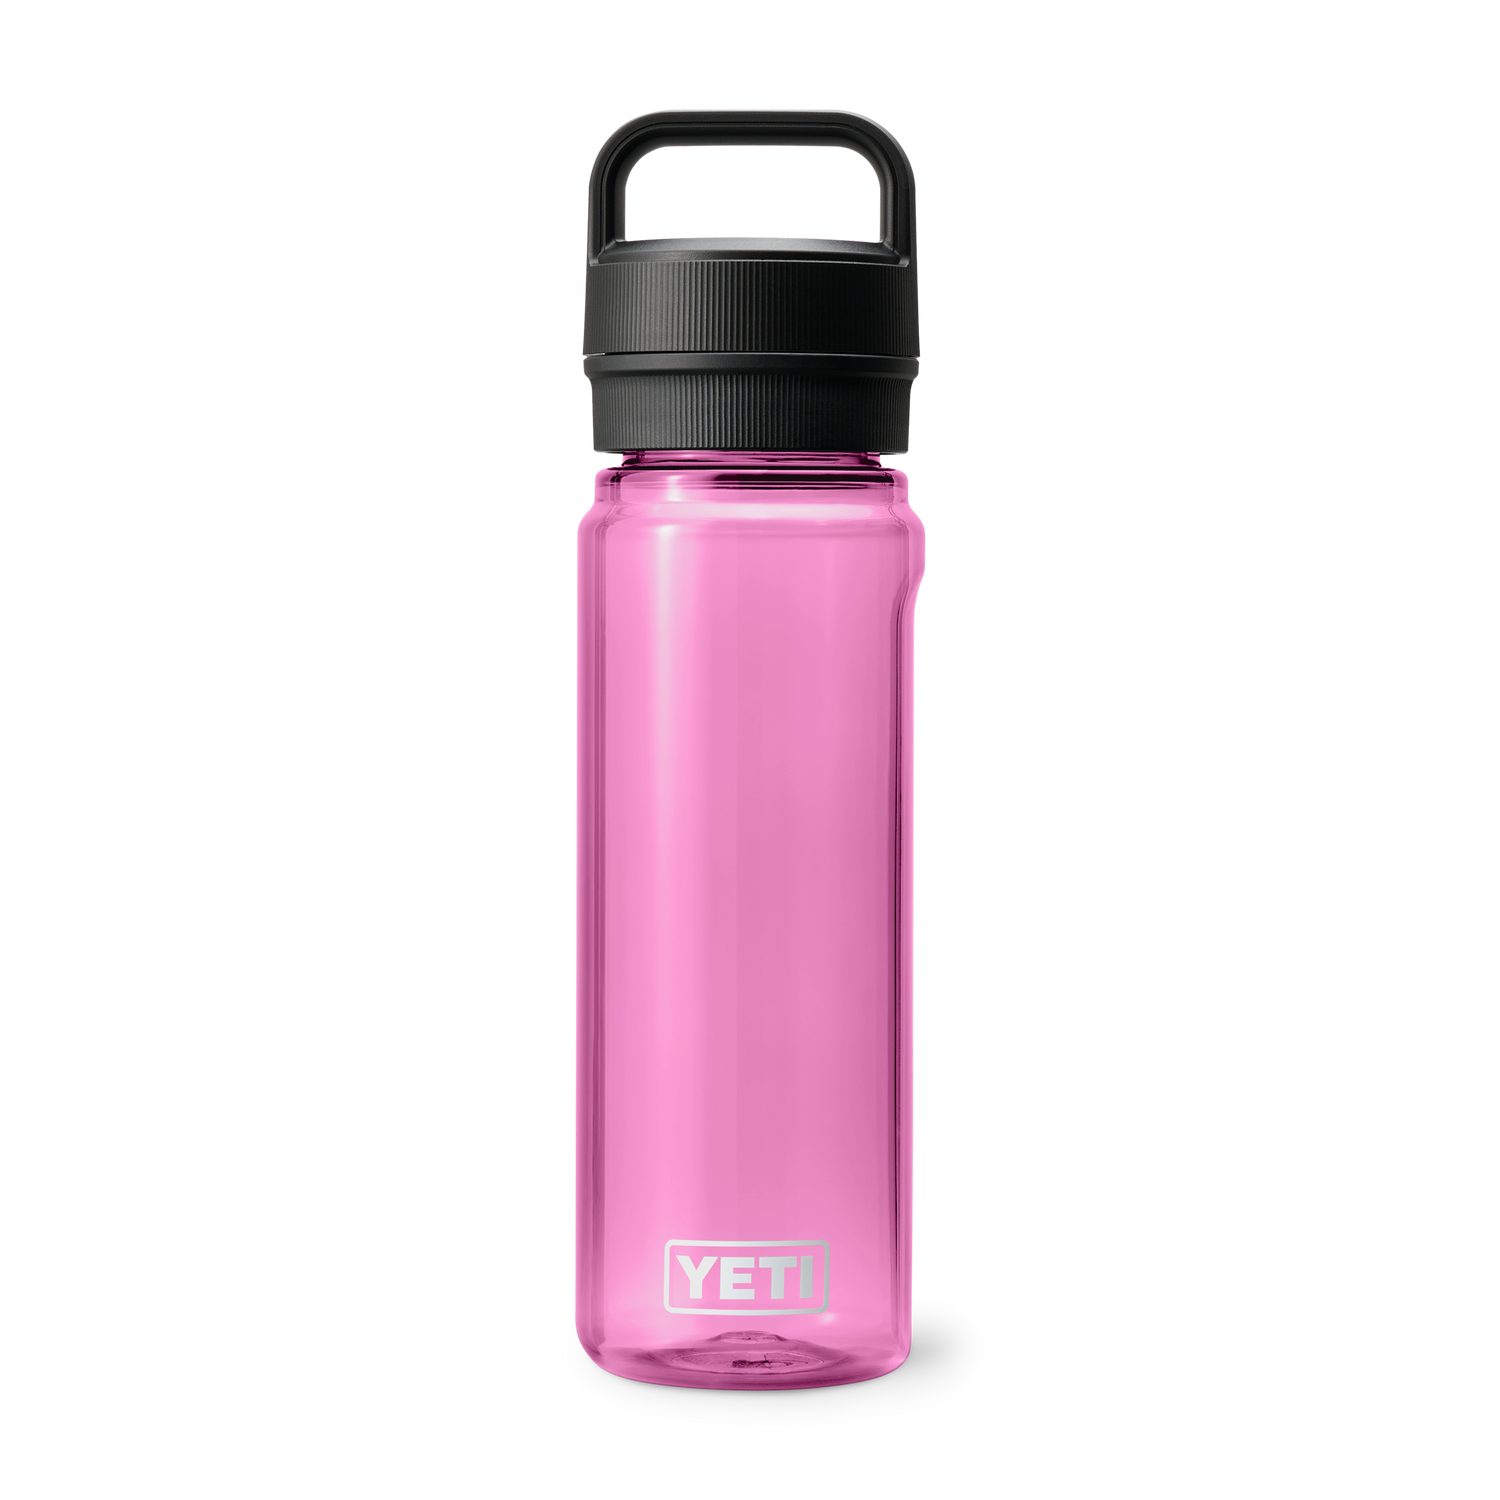 YETI Rambler 64 oz Bottle, Vacuum Insulated, Stainless Steel with Chug Cap,  Power Pink